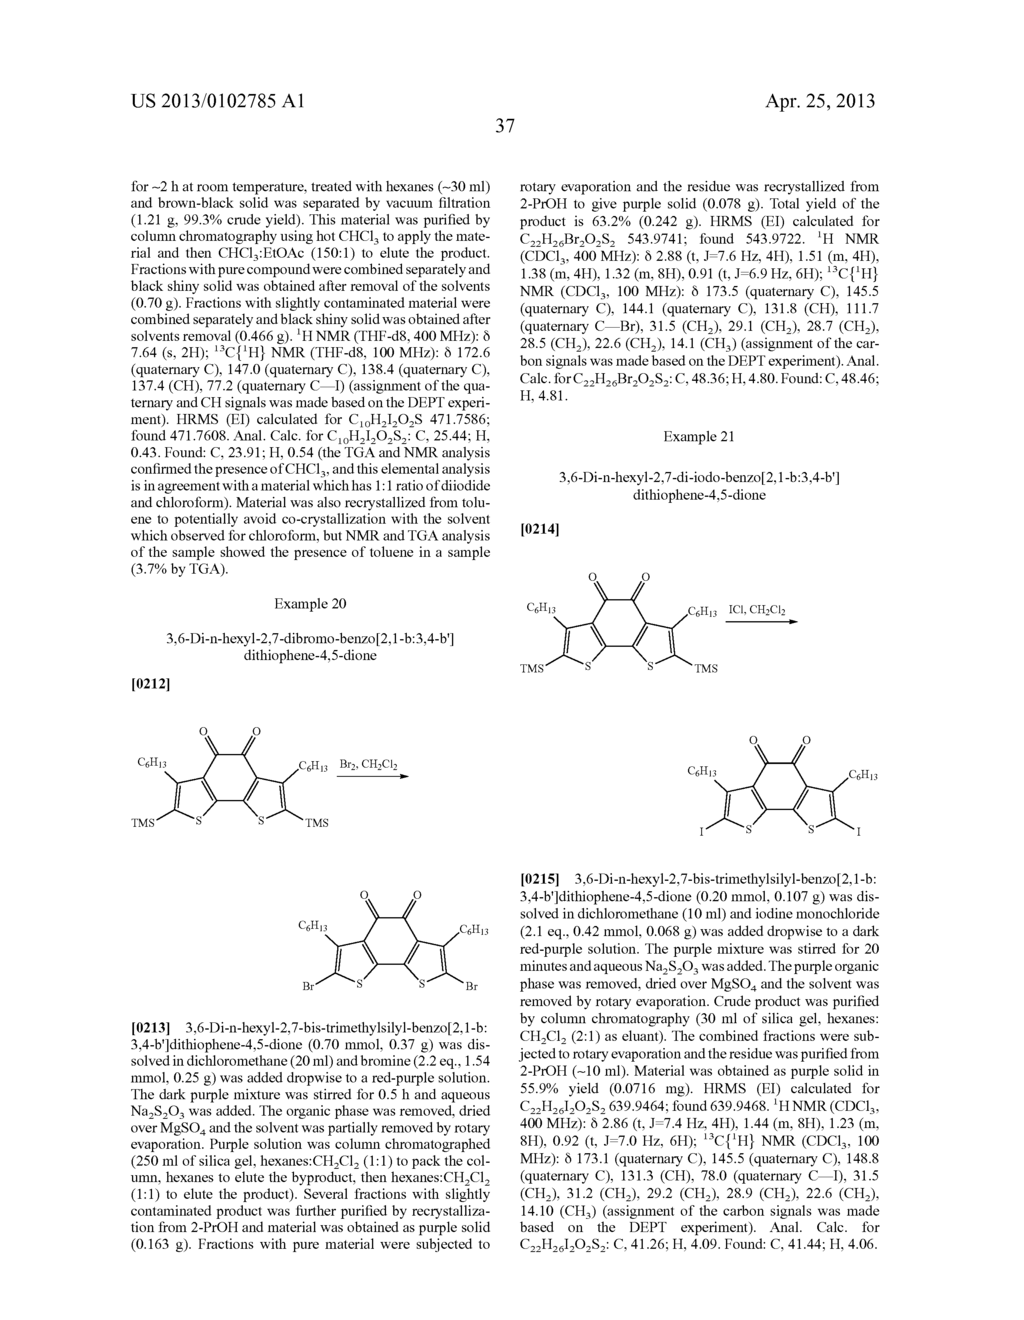 METHOD OF MAKING COUPLED HETEROARYL COMPOUNDS VIA REARRANGEMENT OF     HALOGENATED HETEROAROMATICS FOLLOWED BY OXIDATIVE COUPLING - diagram, schematic, and image 39